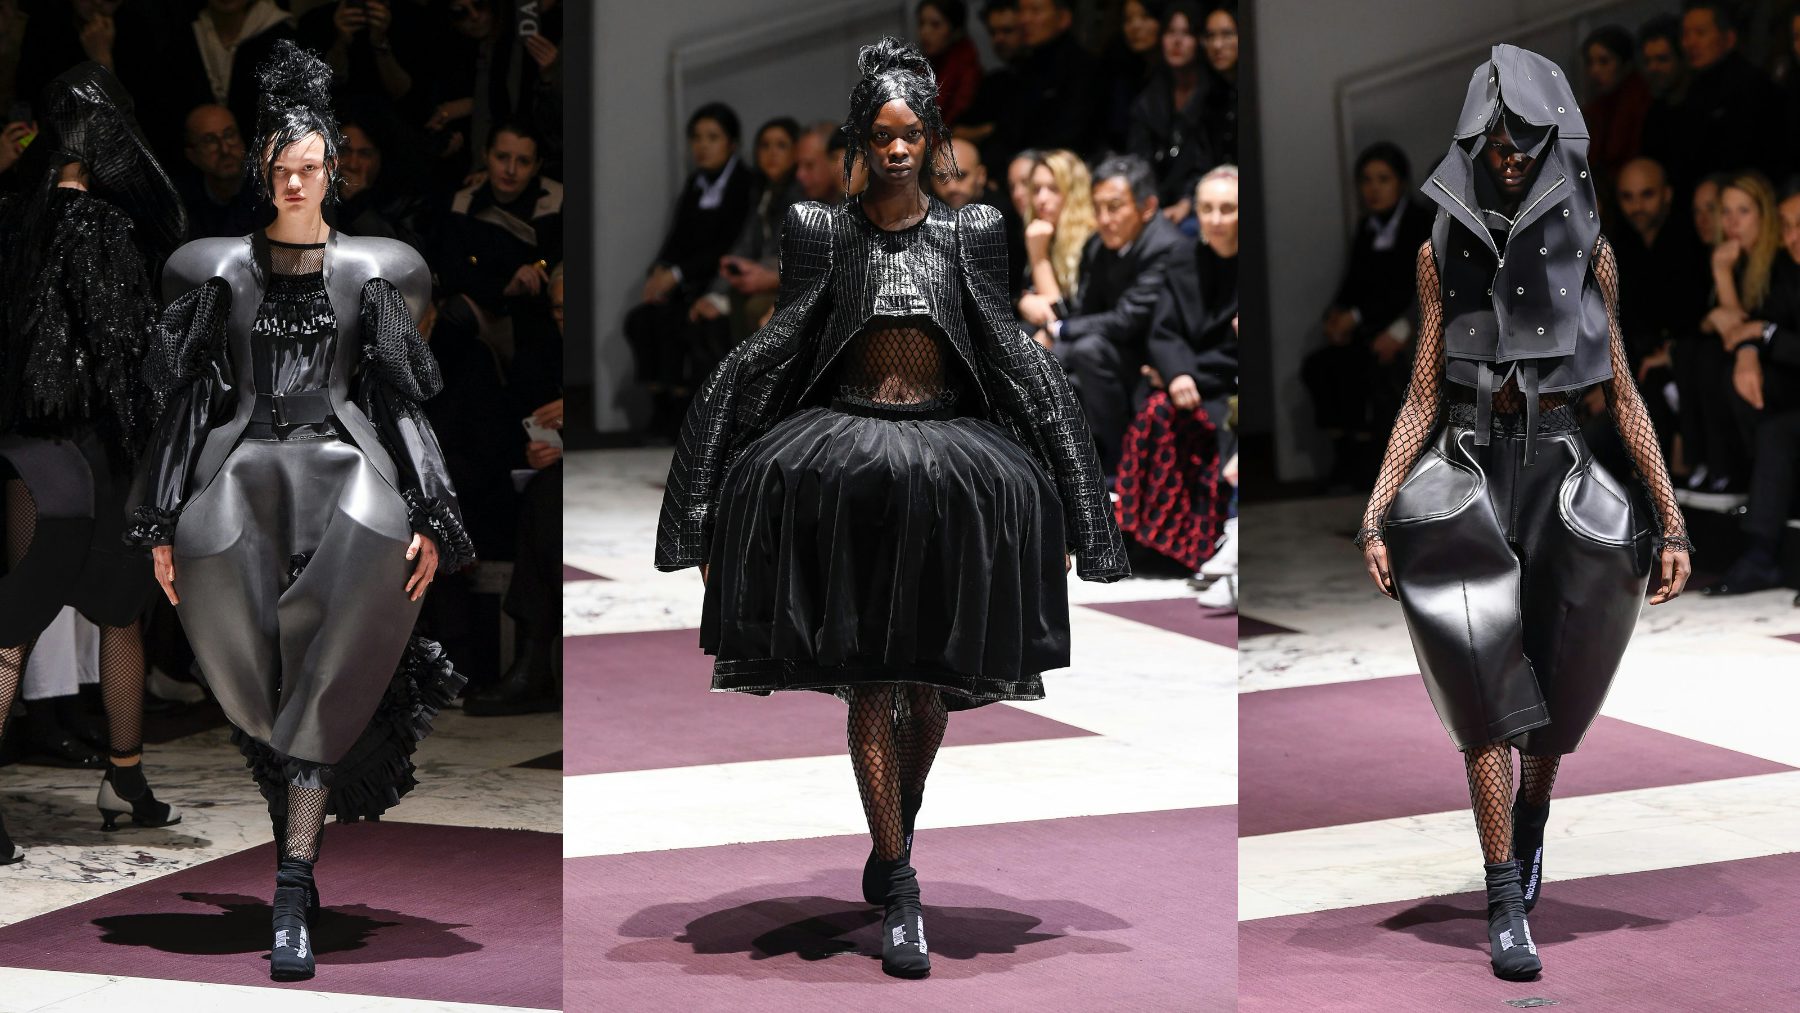 Top 10 Shows of the Season | Fashion Show Review, Ready-to-Wear ...